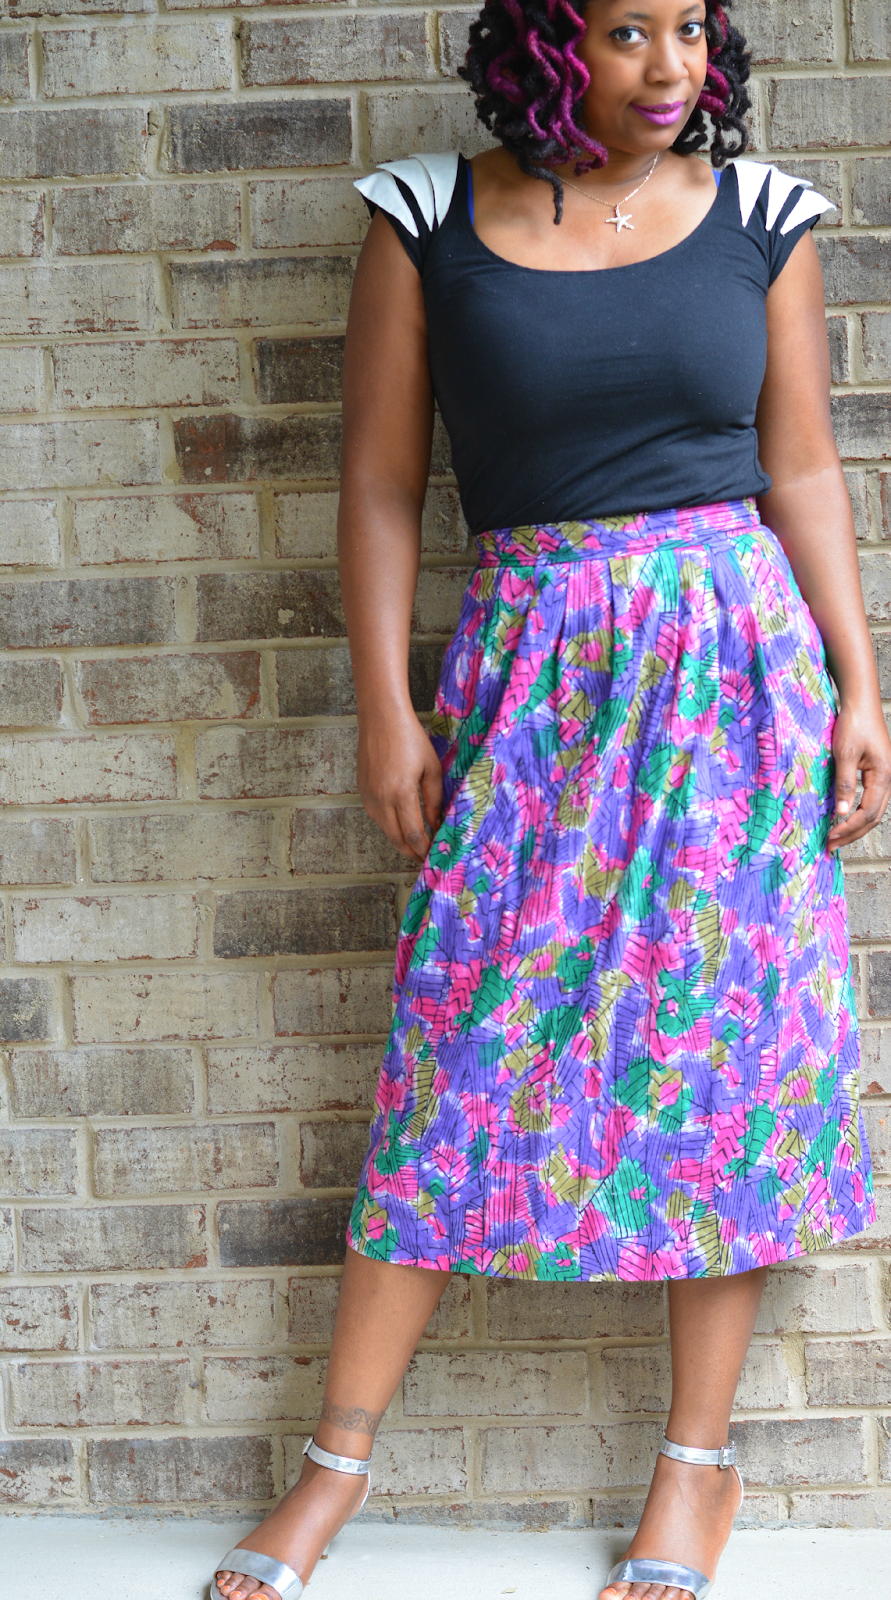 Casual summer skirt from a thrift store. Easy to wear and affordable in many bright, fun colors for summer.